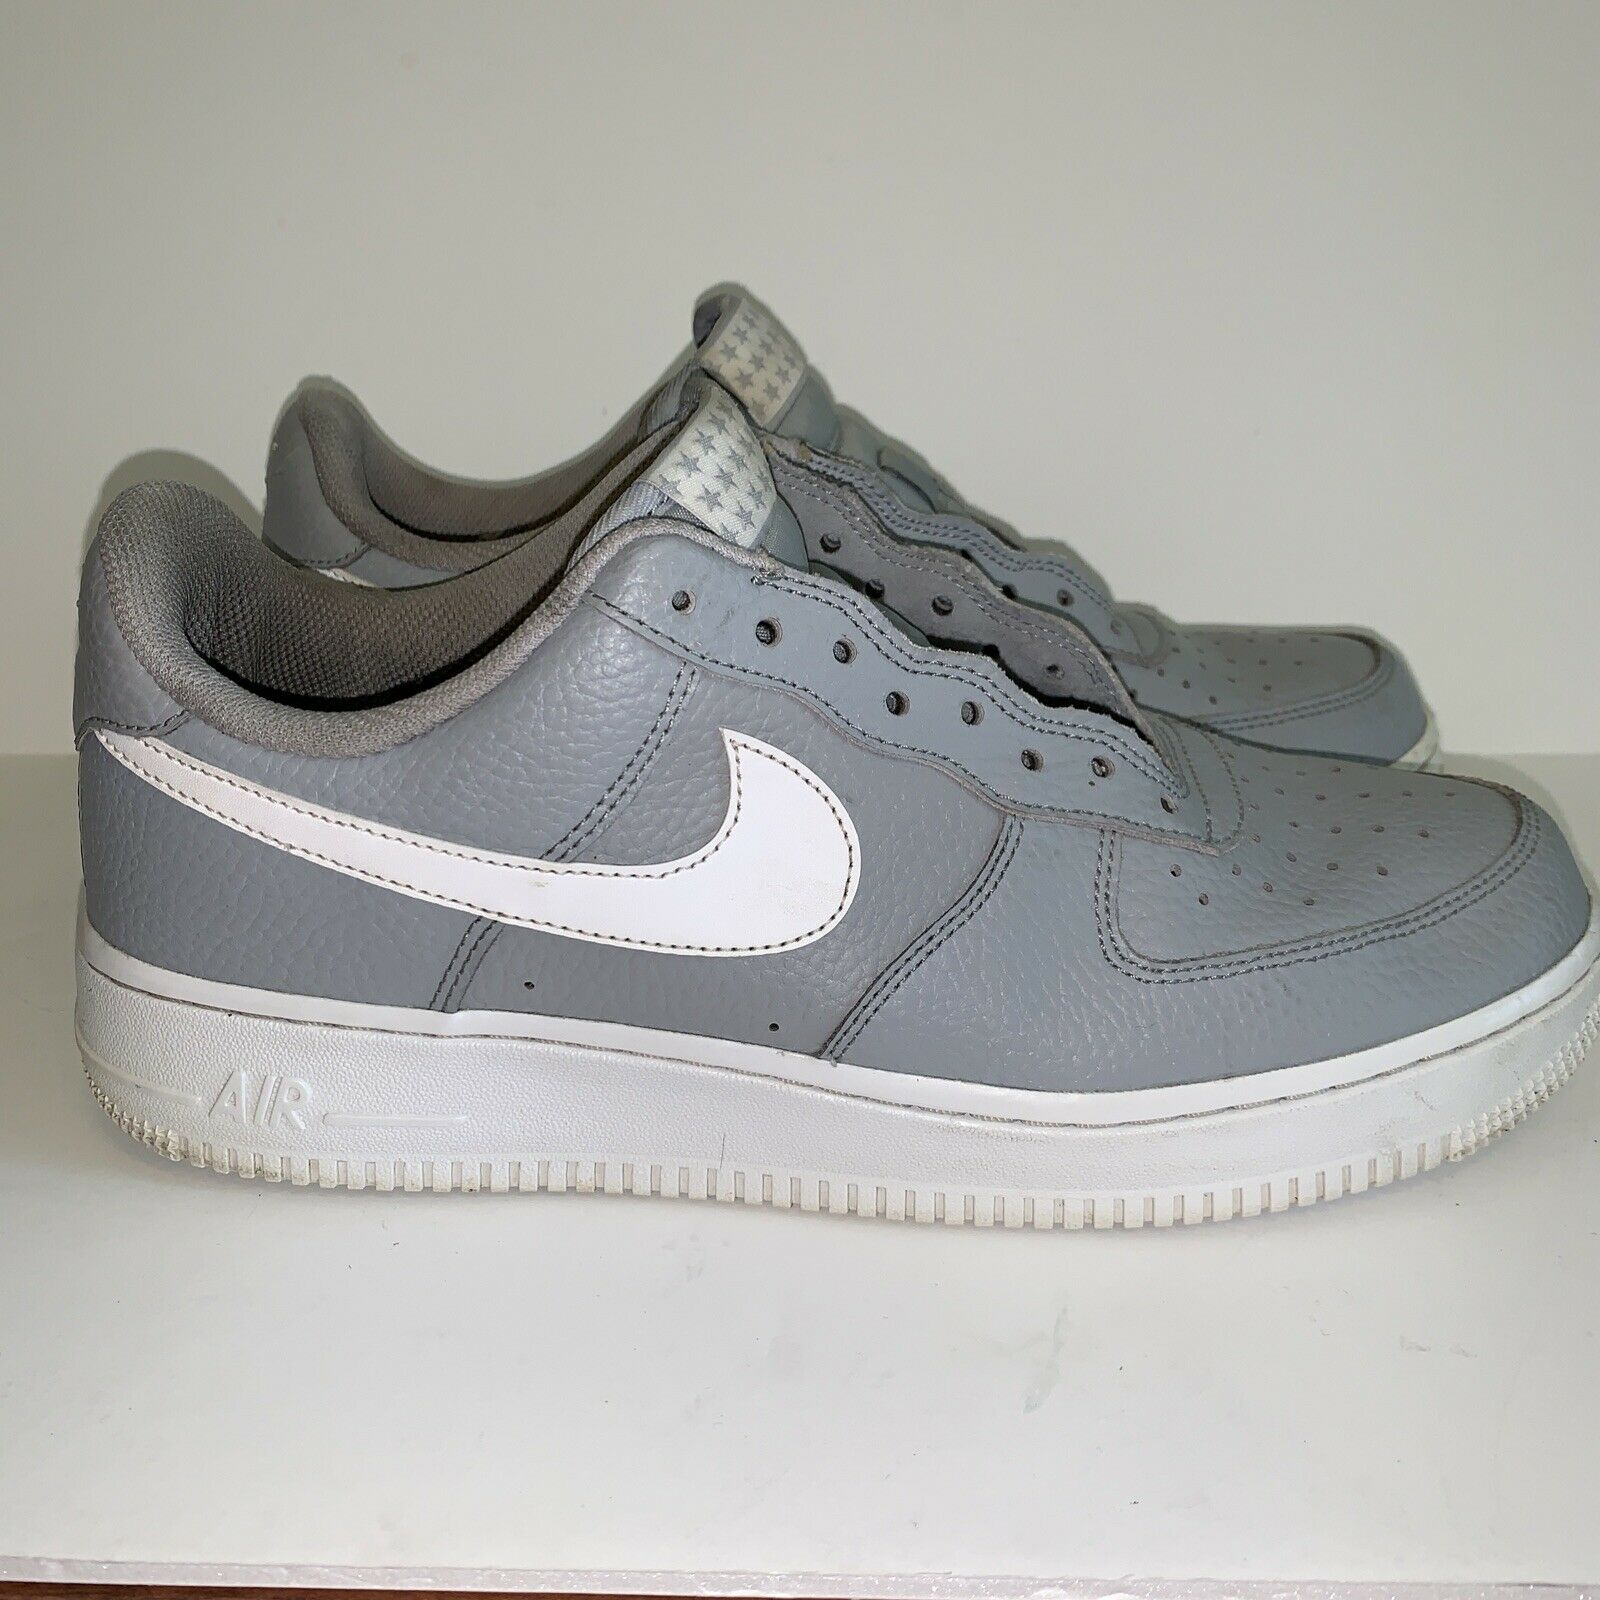 Nike Air Force 1 Low Size 10 Wolf Grey White AA4083-013 Leather Shoes NO LACES